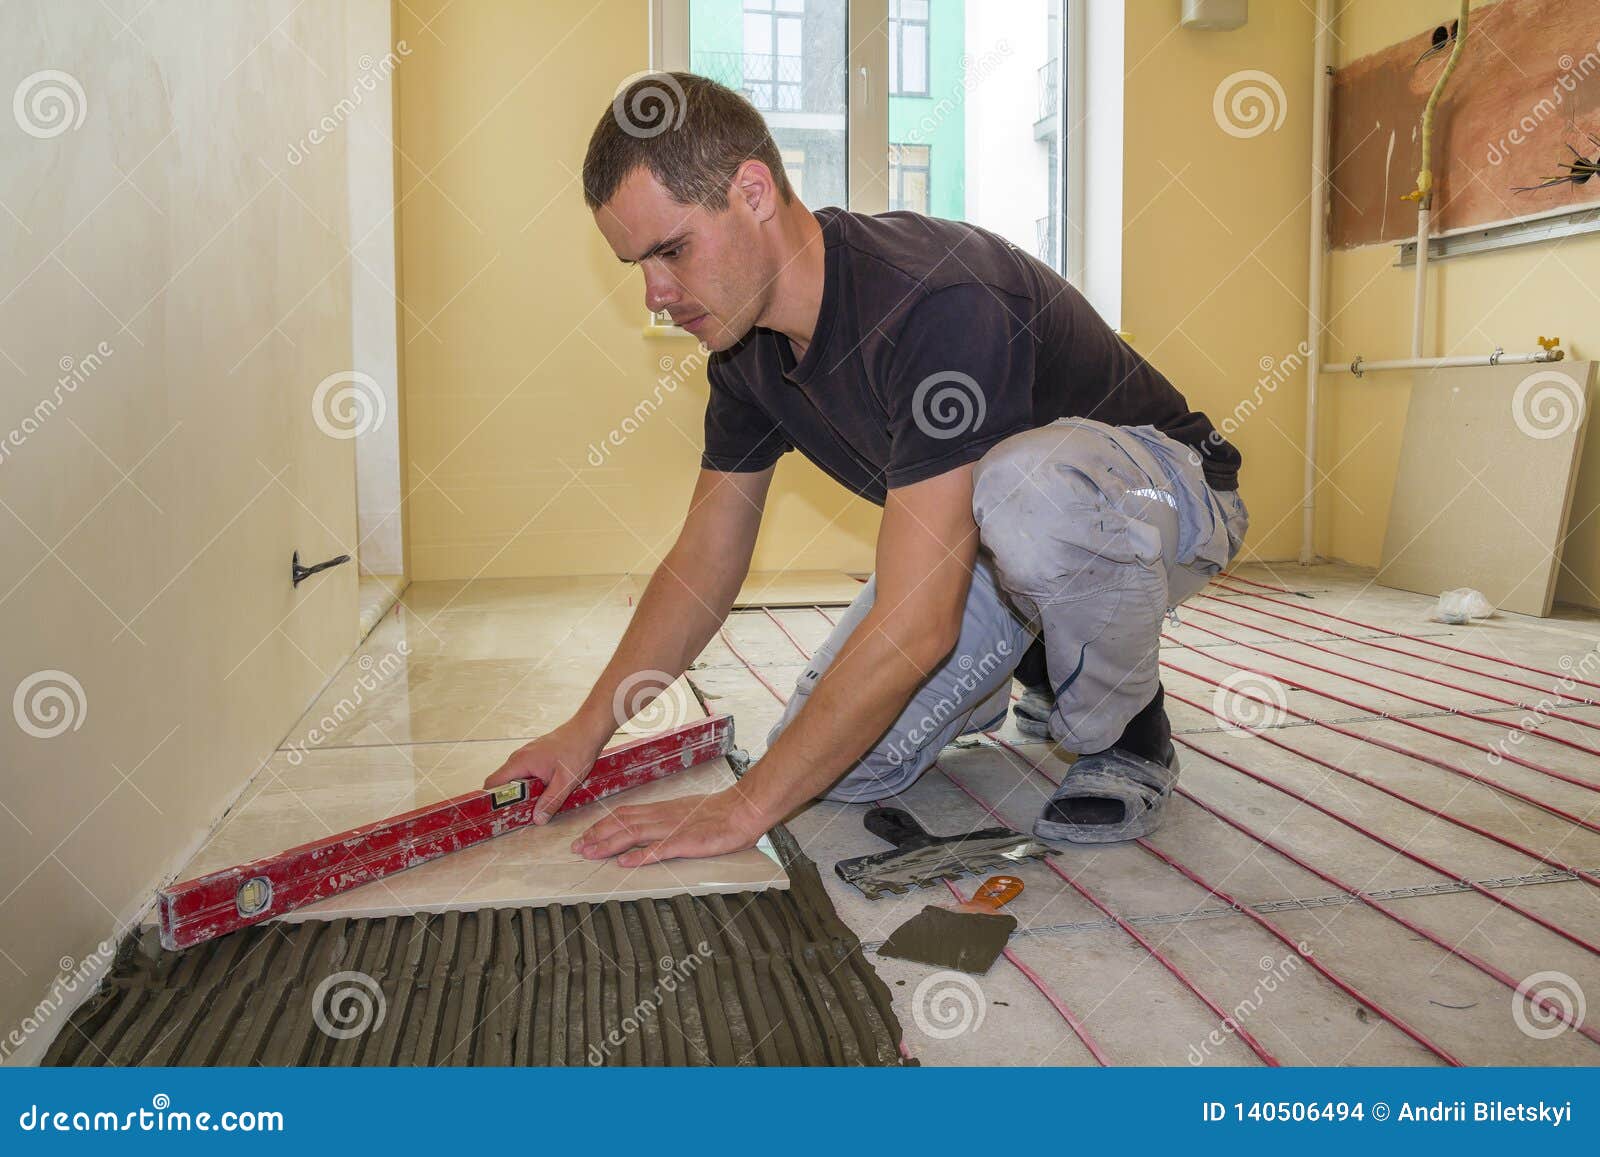 Young Worker Tiler Installing Ceramic Tiles Using Lever On Cement